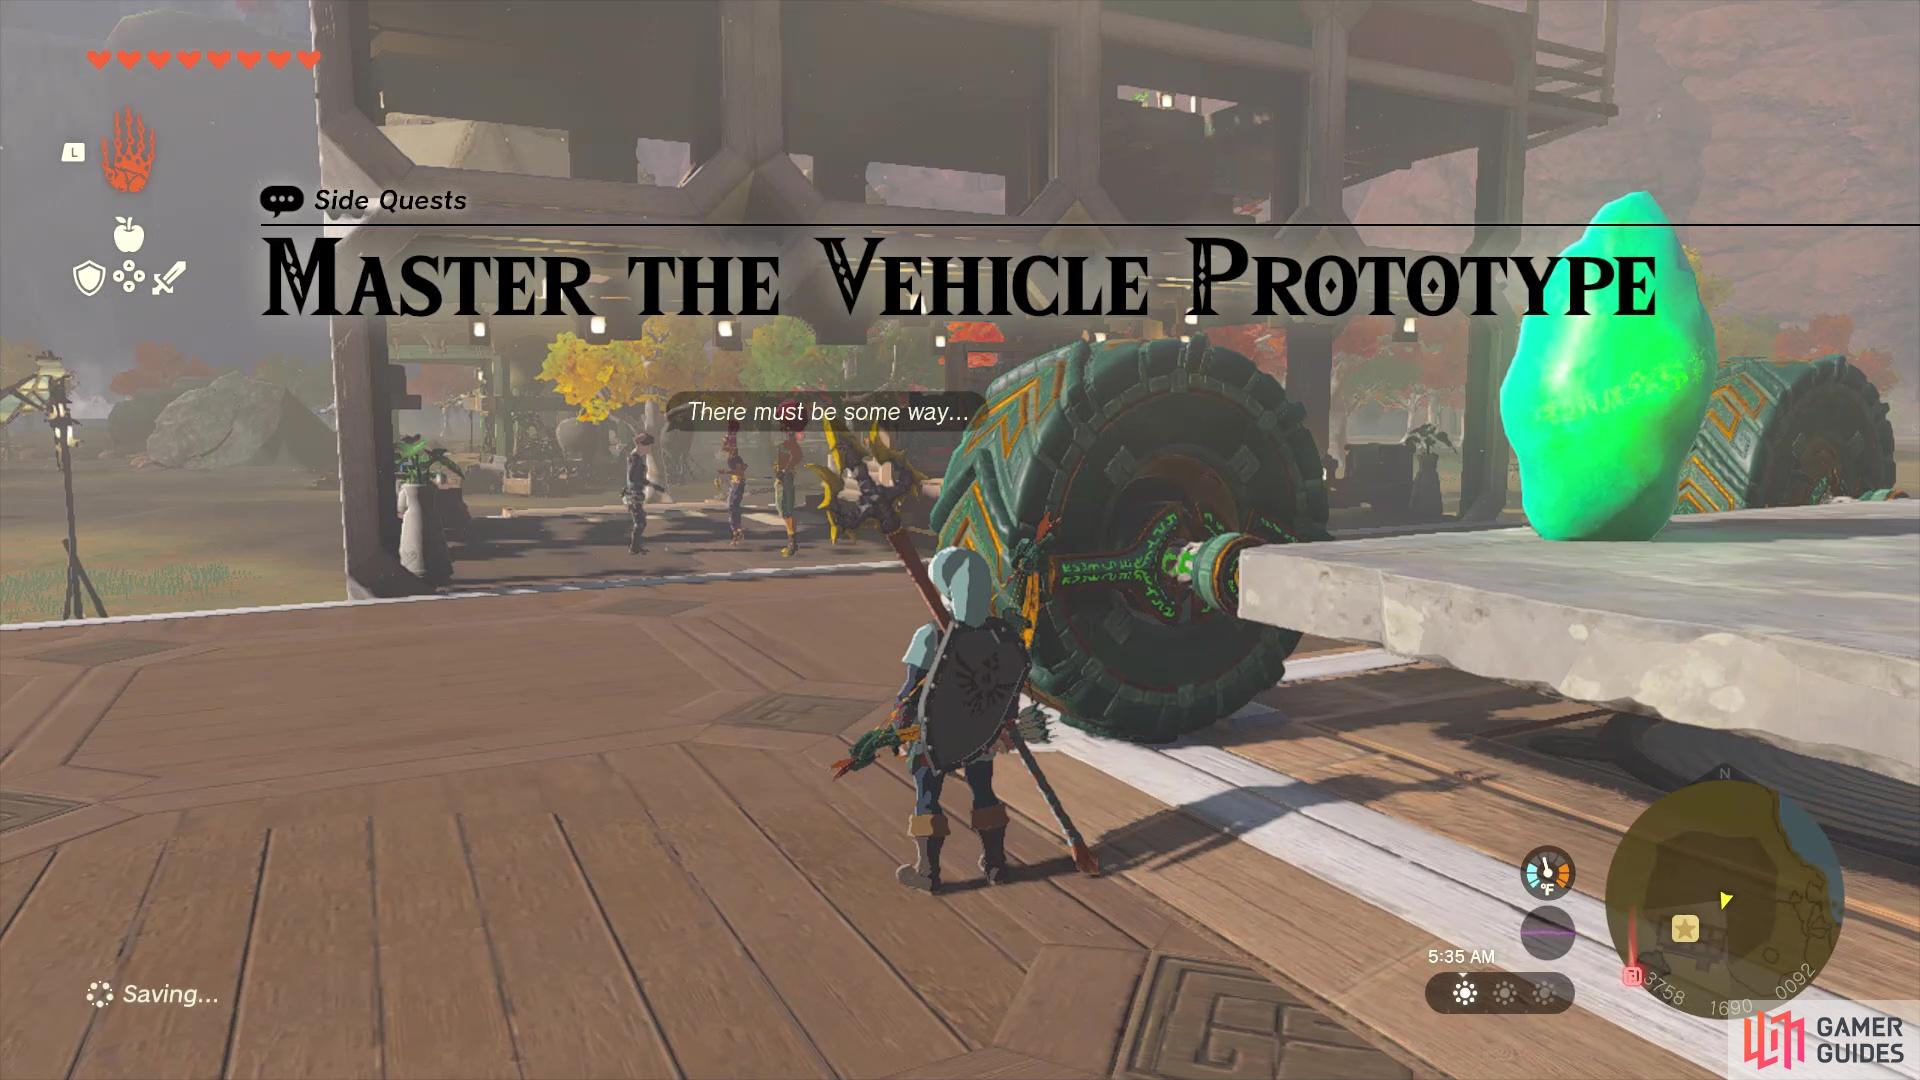 The Master the Vehicle Prototype side quest is found right outside of Tarrey Town.